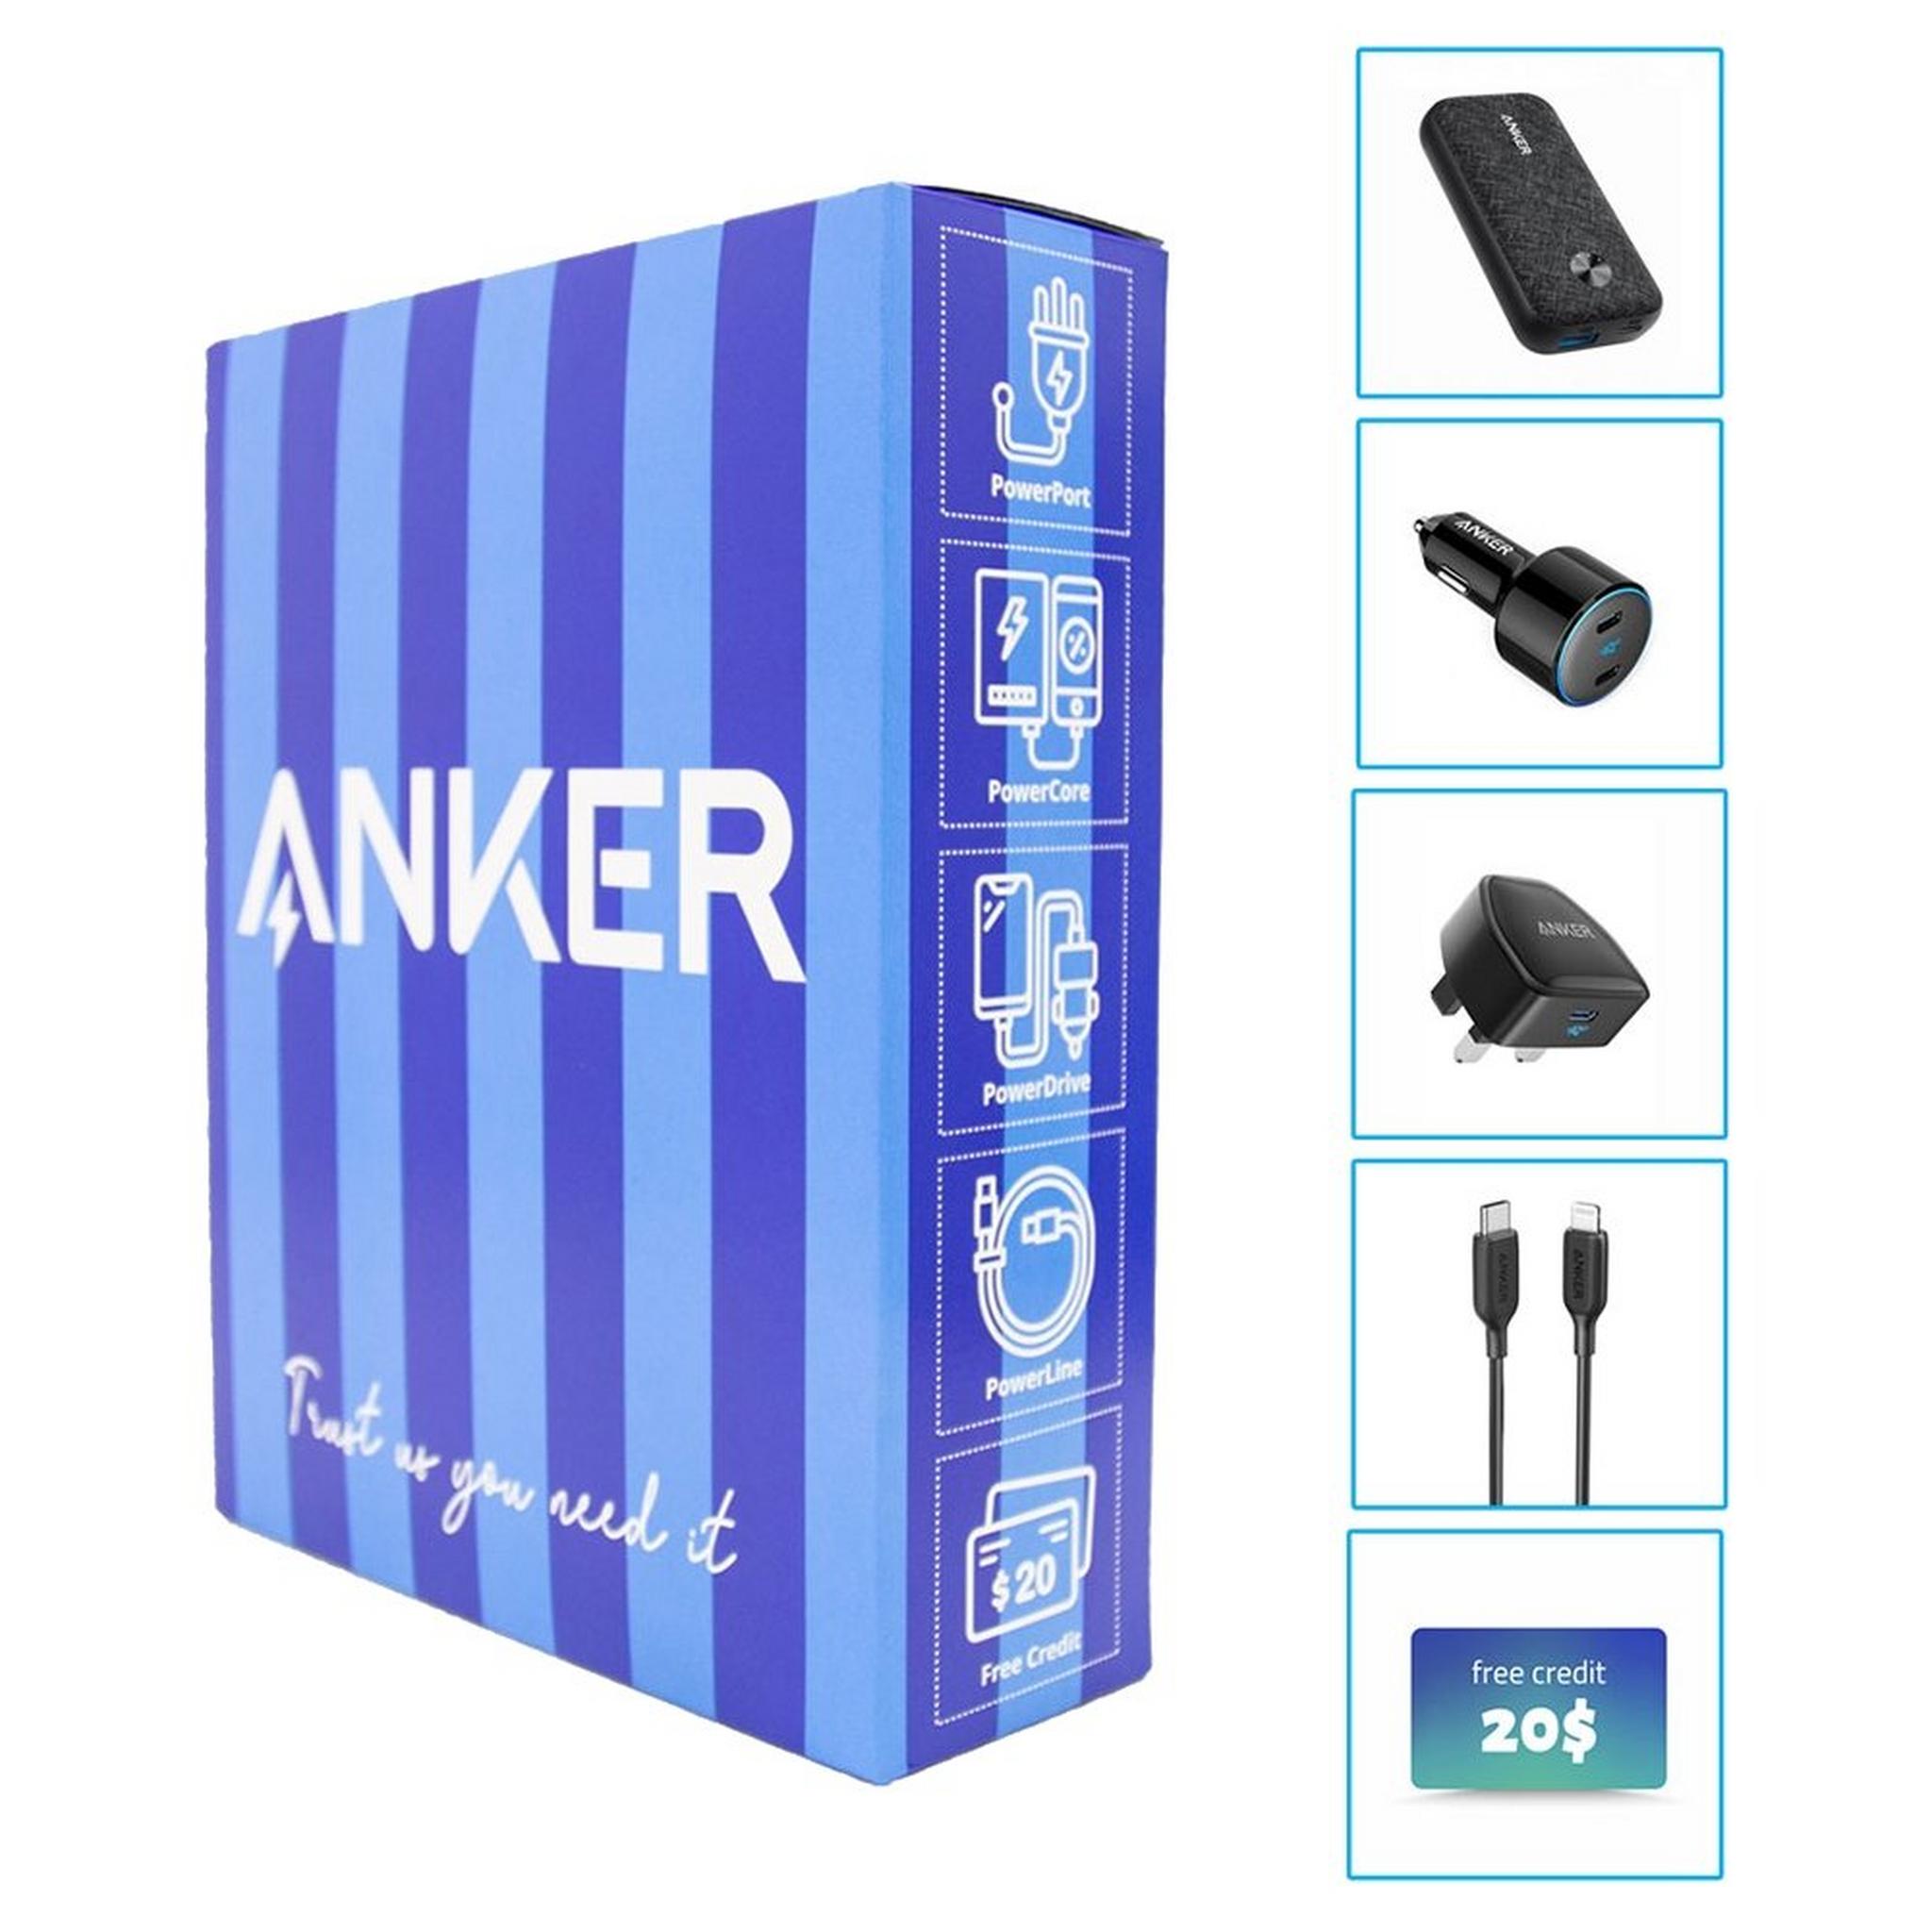 Anker Bundle PowerBank + Cable + Car Charger + Wall Charger + Free iTunes Card